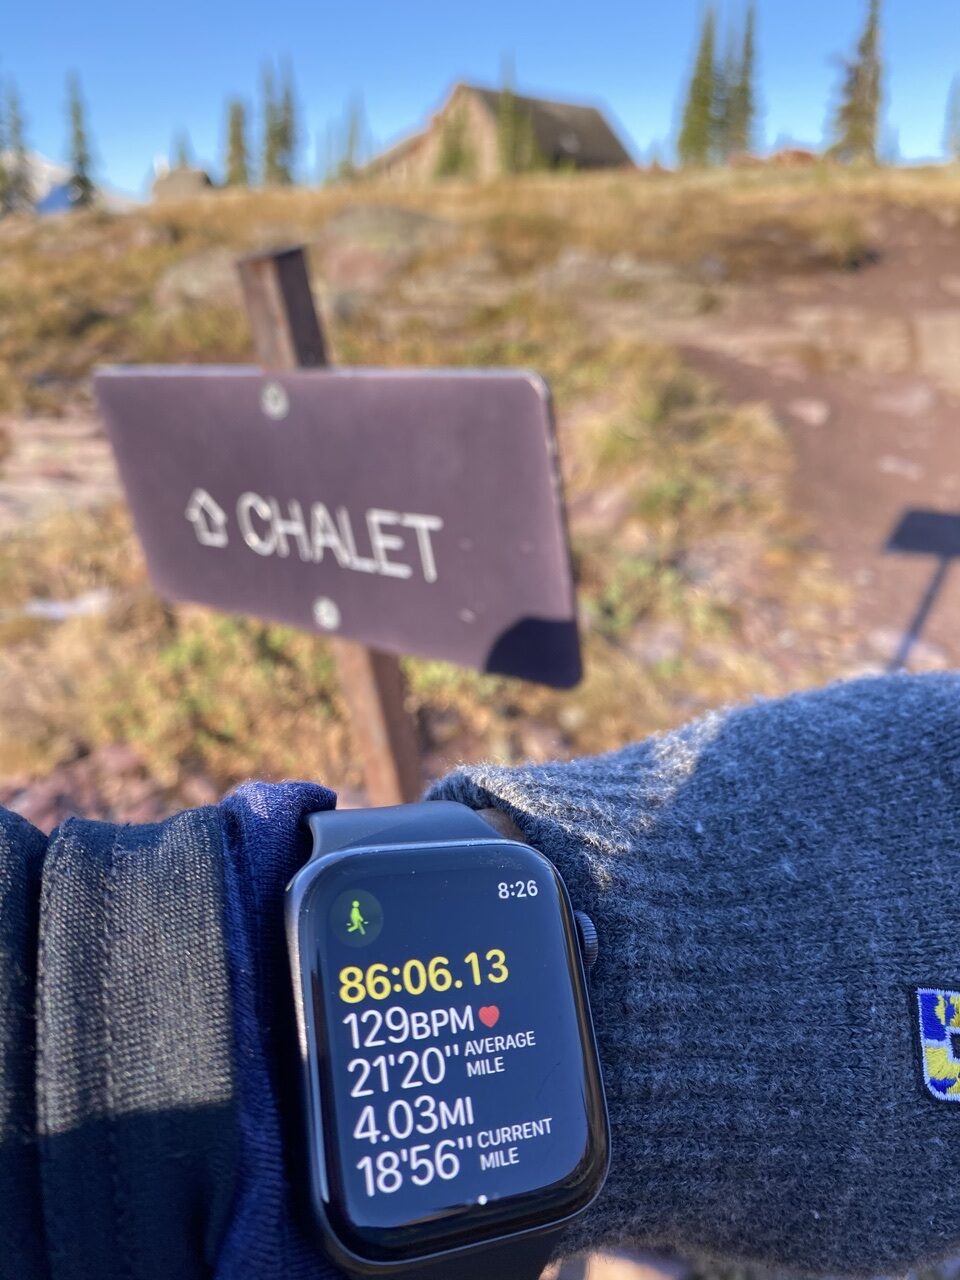 Chalet sign and AppleWatch time/distance display